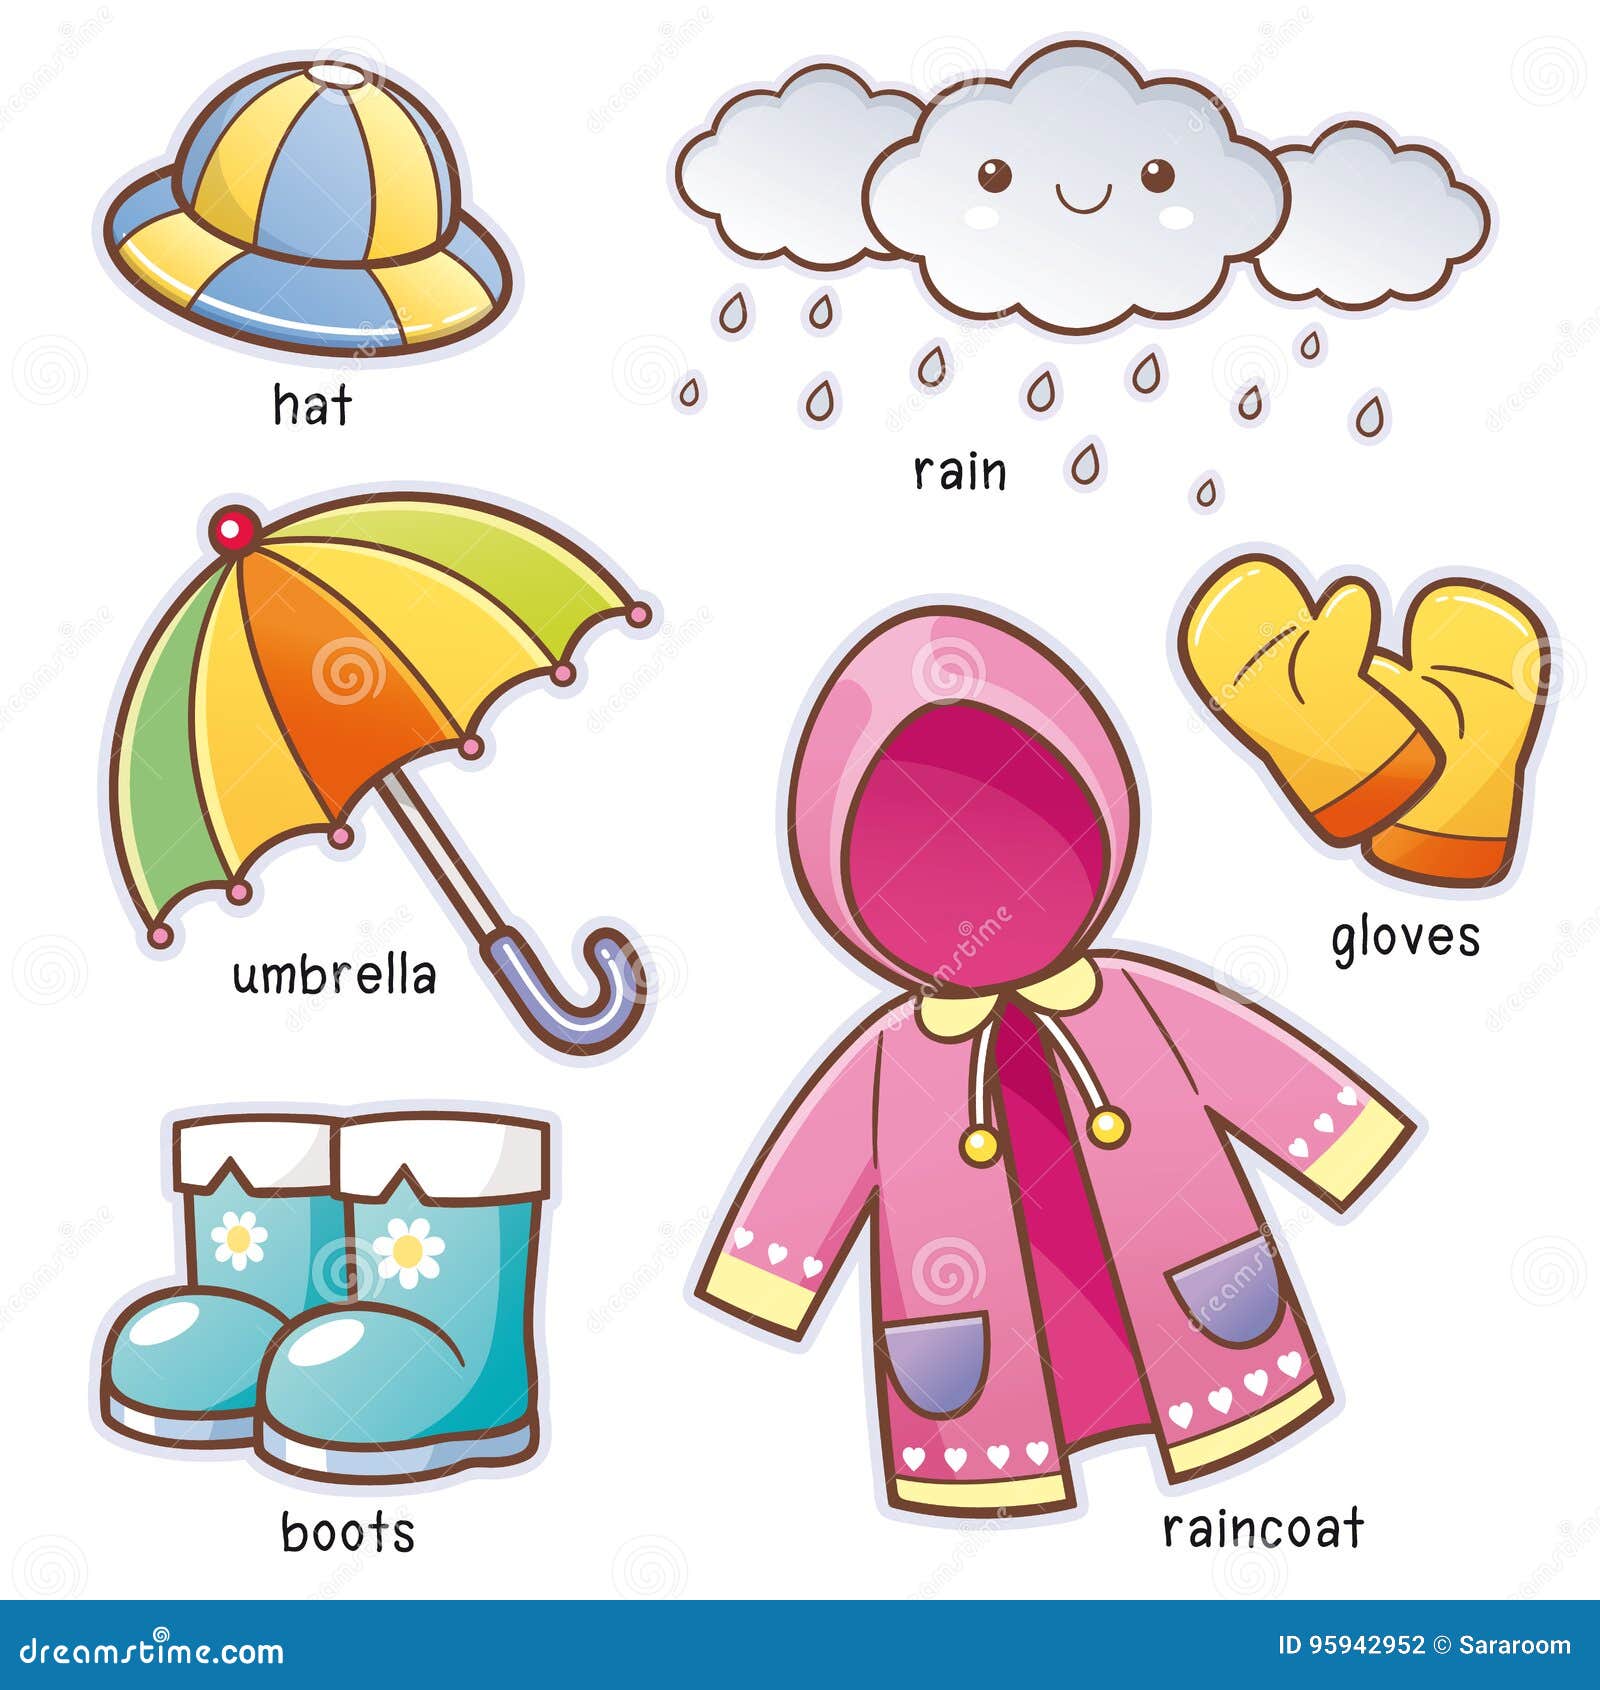 Rain Cartoons, Illustrations & Vector Stock Images - 74588 Pictures to